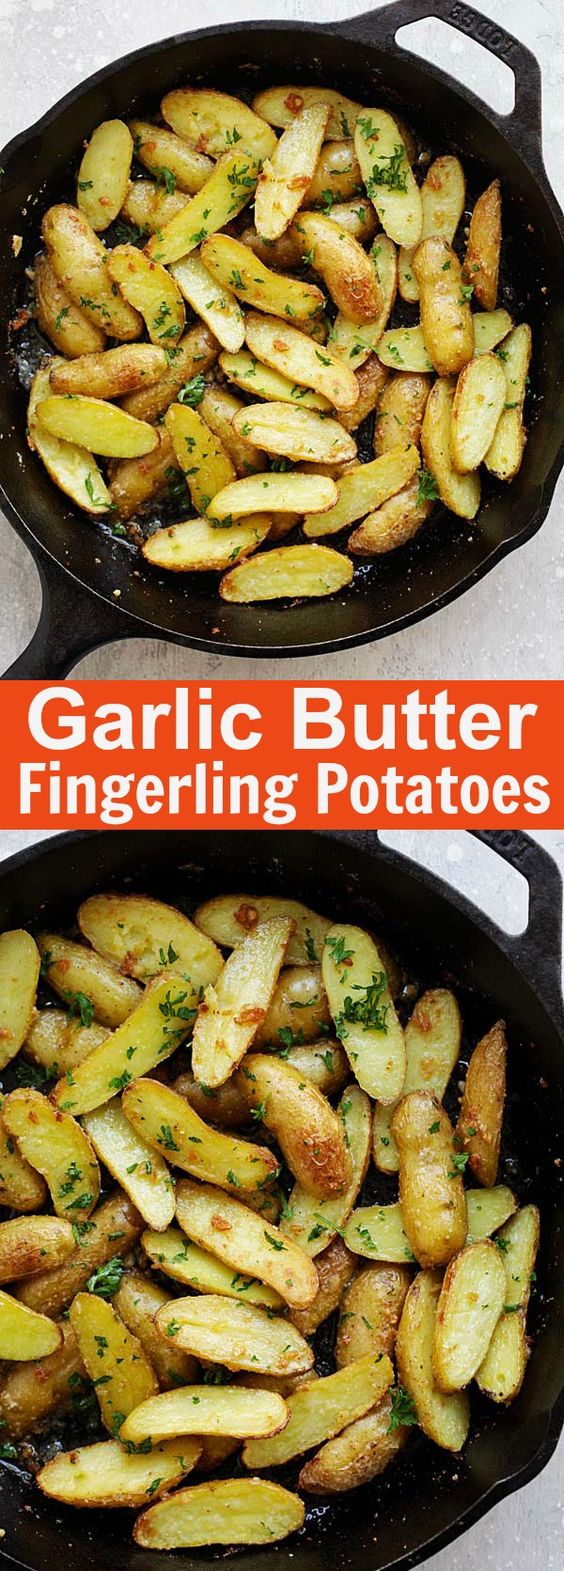 Roasted Fingerling Potatoes with butter, crispy garlic and parsley. This is the best roasted potatoes recipe ever with only 5 ingredients and takes 30 mins | rasamalaysia.com